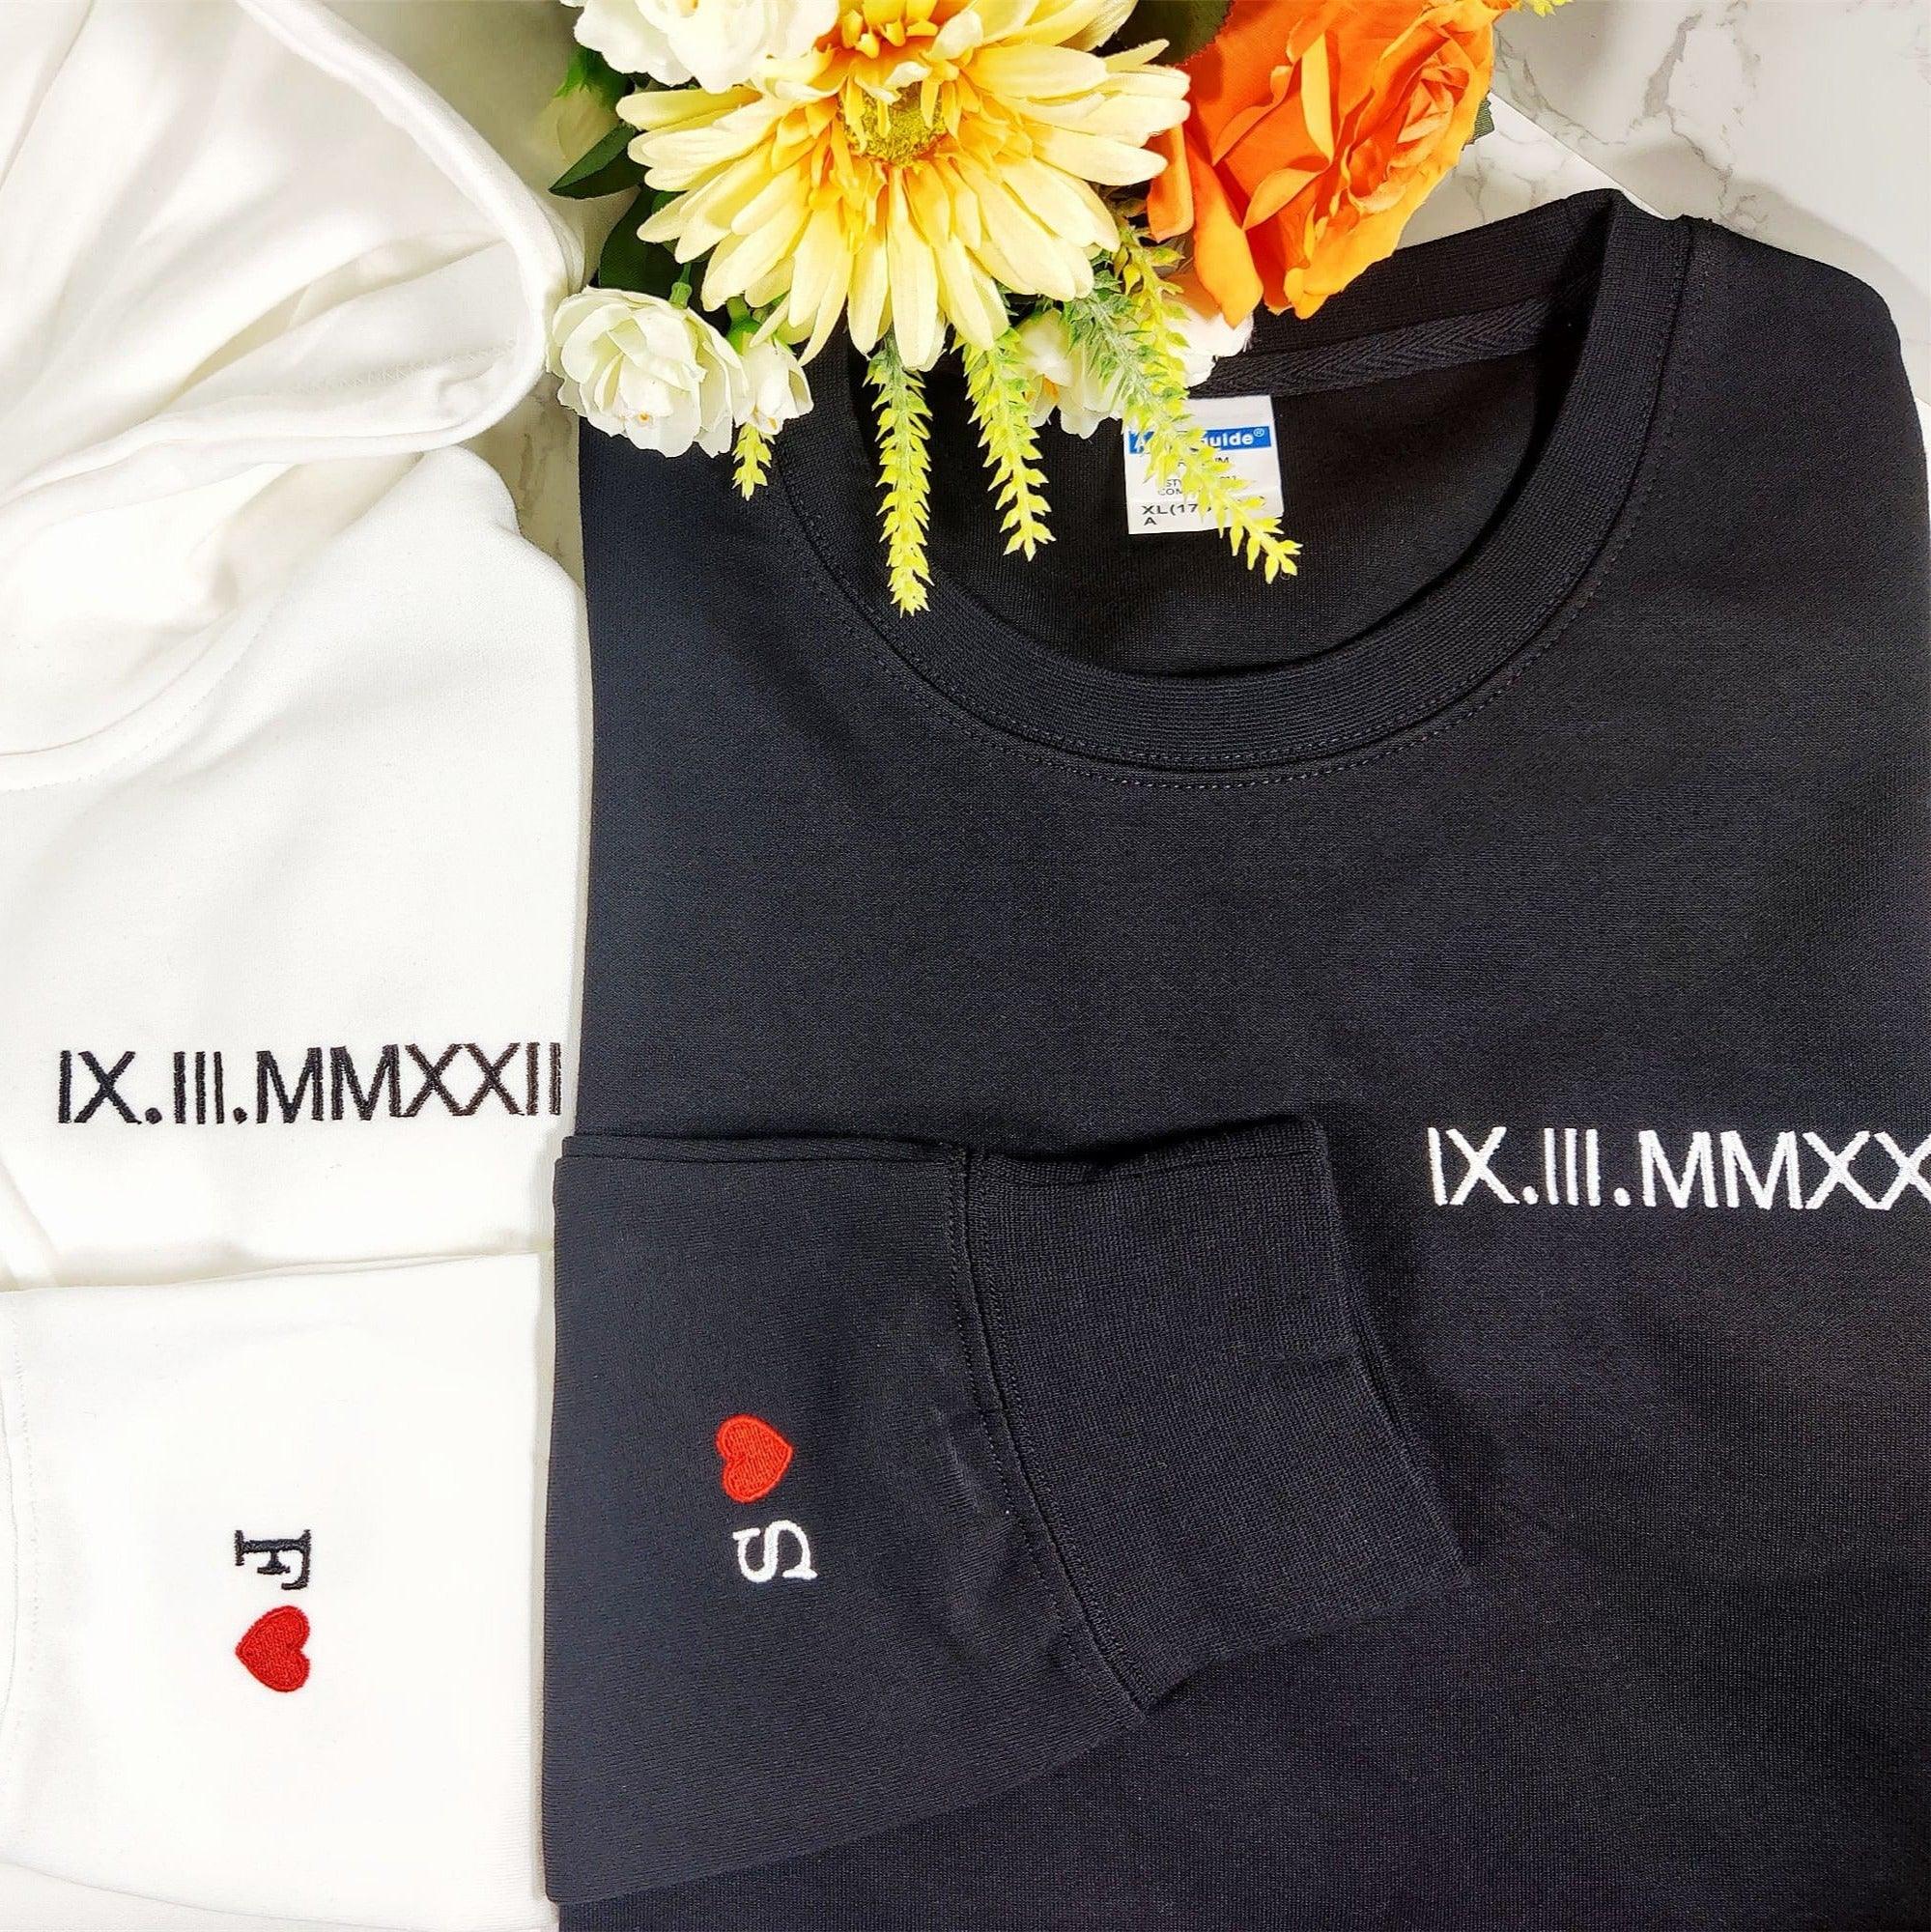 Custom Embroidered Matching Sweatshirt with Roman Numeral Sweater Text & Initials On Sleeve